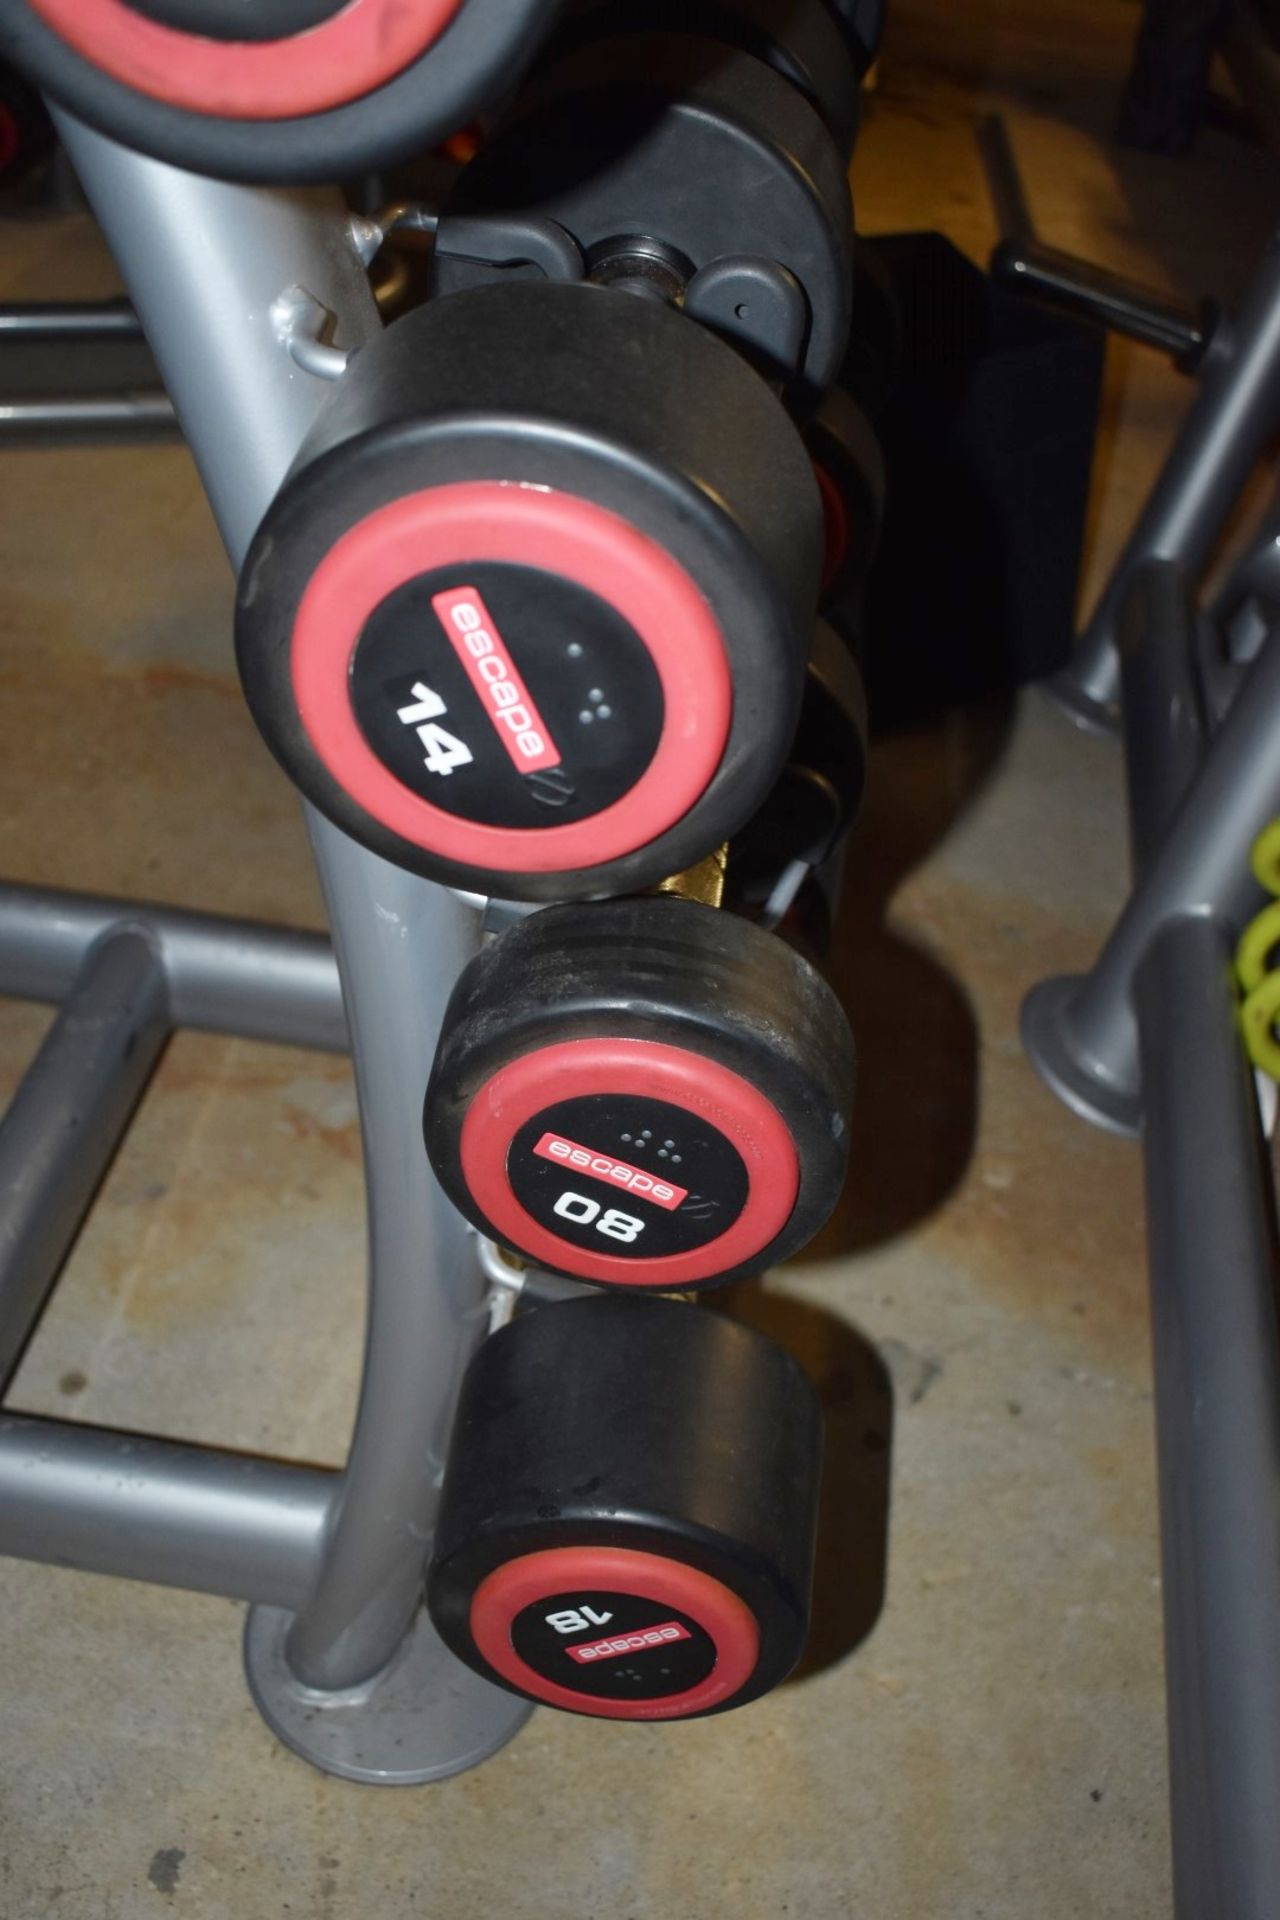 18 x Escape Polyurethane Dumbell Weights - Includes 8kg to 30kg Dumbells and Rubber Dumrbell - Image 5 of 7